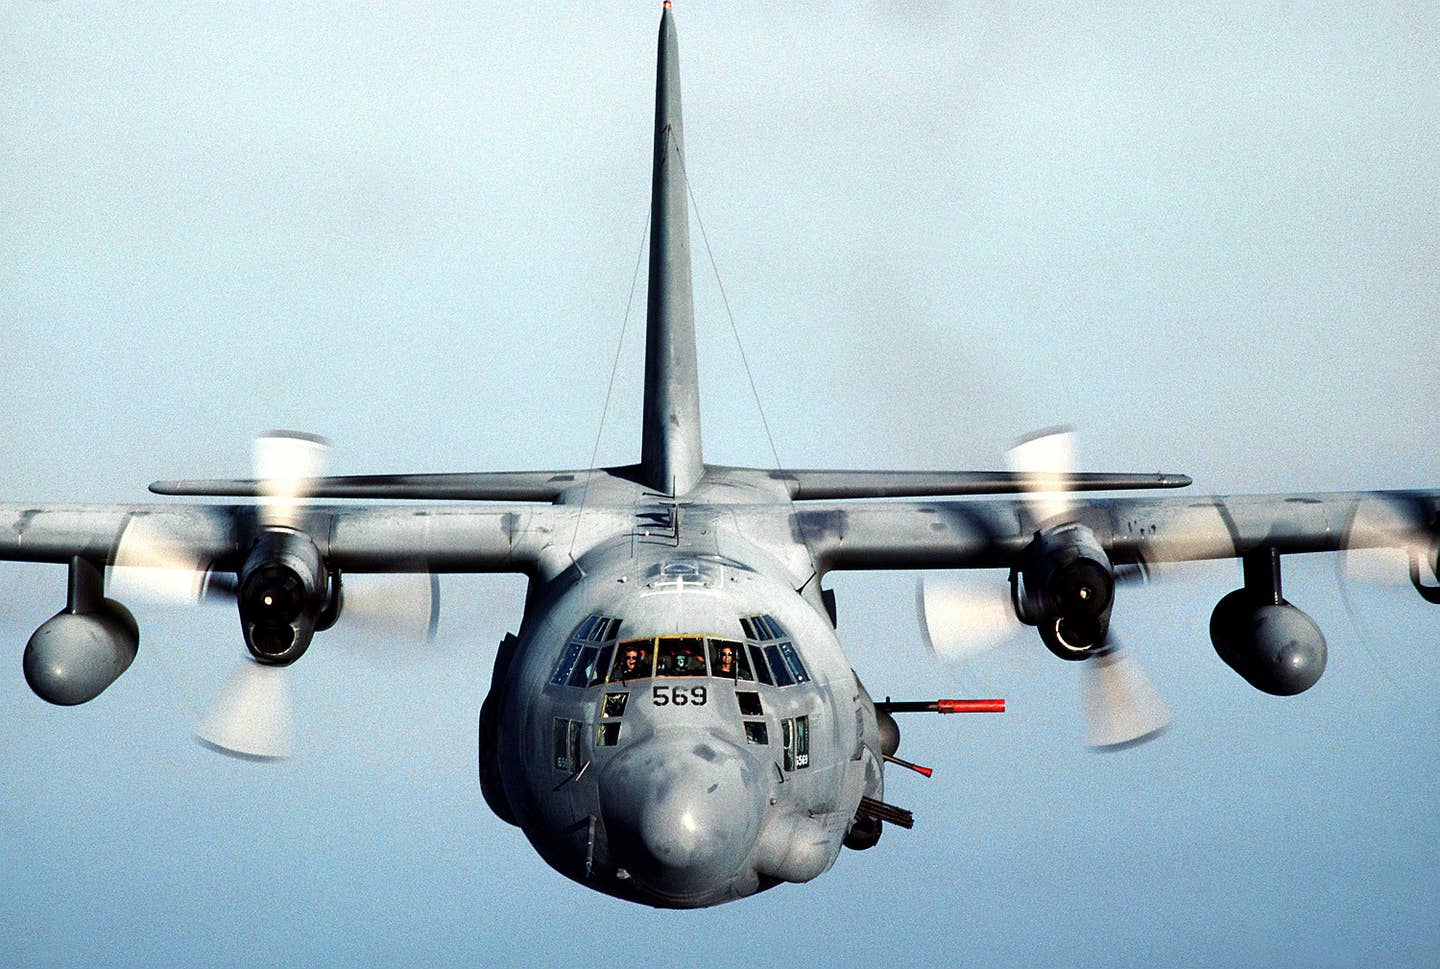 An AC-130H Spectre in-flight with its guns visible towards the right side of the picture (US Air Force photograph by TSgt. Lee Schading)